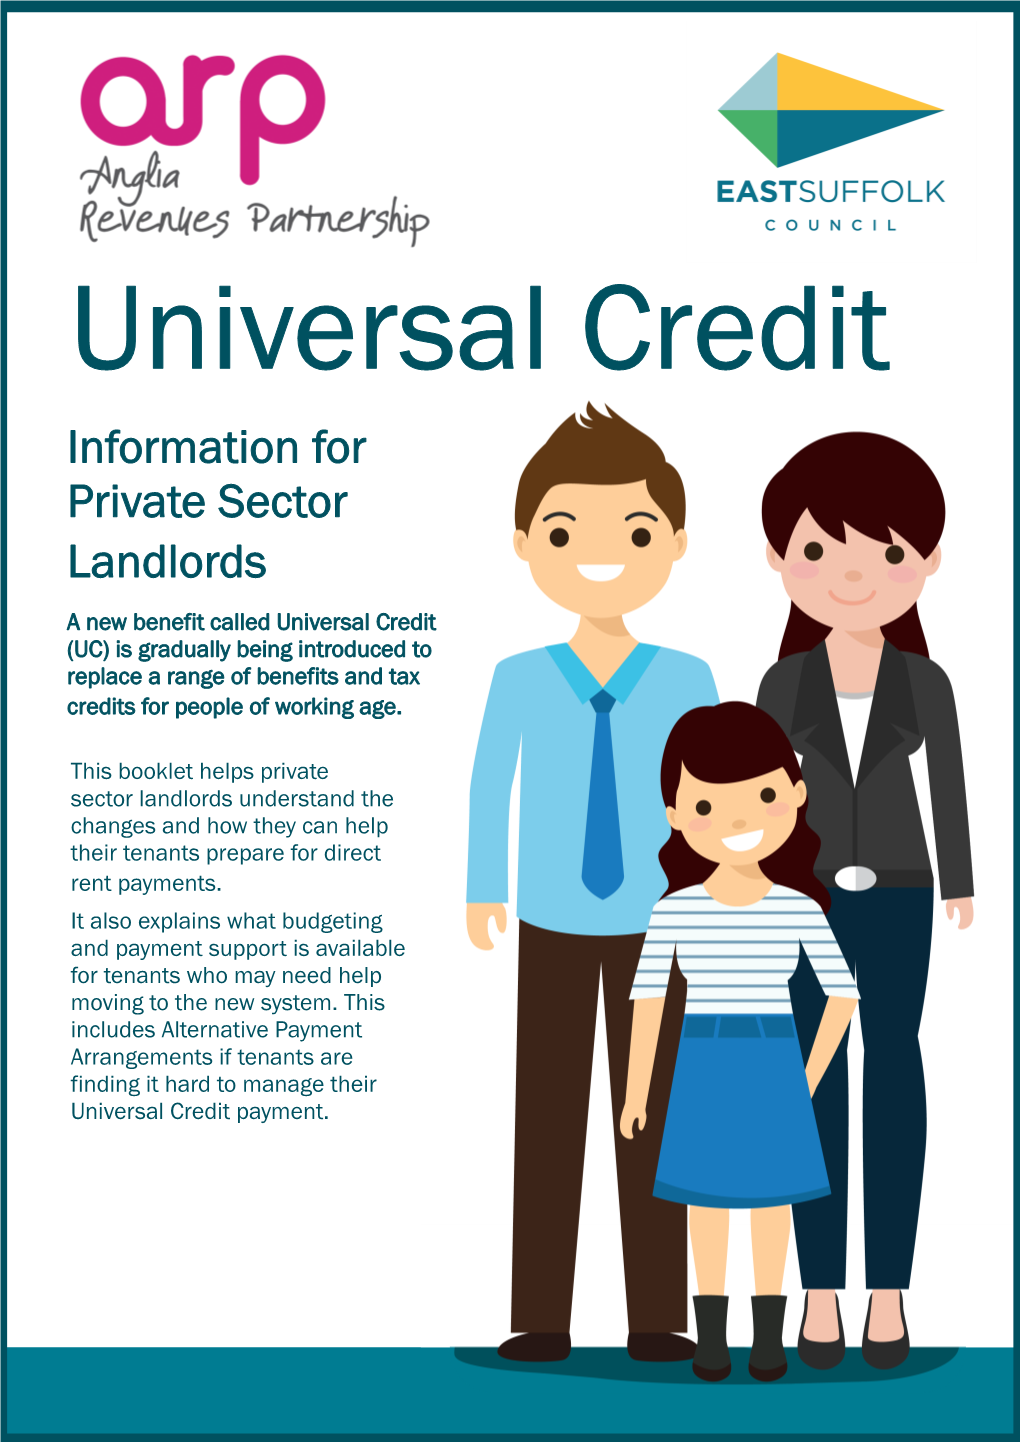 East Suffolk Universal Credit Guide for Private Landlords